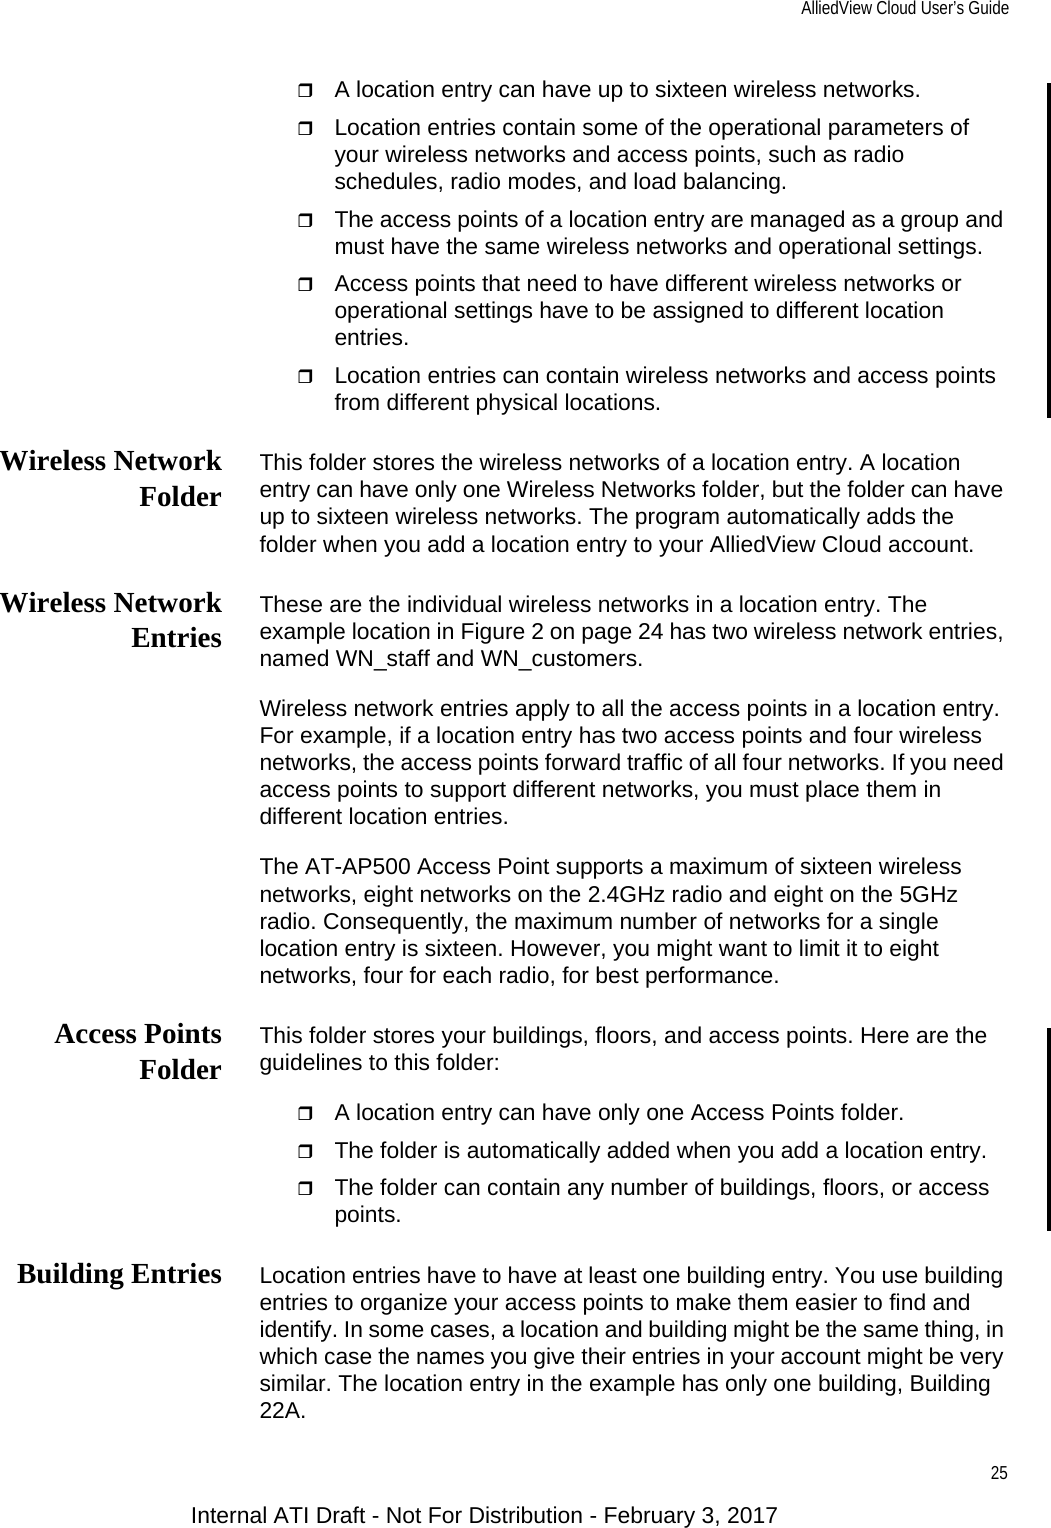 AlliedView Cloud User’s Guide25A location entry can have up to sixteen wireless networks.Location entries contain some of the operational parameters of your wireless networks and access points, such as radio schedules, radio modes, and load balancing.The access points of a location entry are managed as a group and must have the same wireless networks and operational settings.Access points that need to have different wireless networks or operational settings have to be assigned to different location entries.Location entries can contain wireless networks and access points from different physical locations.Wireless NetworkFolder This folder stores the wireless networks of a location entry. A location entry can have only one Wireless Networks folder, but the folder can have up to sixteen wireless networks. The program automatically adds the folder when you add a location entry to your AlliedView Cloud account.Wireless NetworkEntries These are the individual wireless networks in a location entry. The example location in Figure 2 on page 24 has two wireless network entries, named WN_staff and WN_customers.Wireless network entries apply to all the access points in a location entry. For example, if a location entry has two access points and four wireless networks, the access points forward traffic of all four networks. If you need access points to support different networks, you must place them in different location entries.The AT-AP500 Access Point supports a maximum of sixteen wireless networks, eight networks on the 2.4GHz radio and eight on the 5GHz radio. Consequently, the maximum number of networks for a single location entry is sixteen. However, you might want to limit it to eight networks, four for each radio, for best performance.Access PointsFolder This folder stores your buildings, floors, and access points. Here are the guidelines to this folder:A location entry can have only one Access Points folder.The folder is automatically added when you add a location entry.The folder can contain any number of buildings, floors, or access points.Building Entries Location entries have to have at least one building entry. You use building entries to organize your access points to make them easier to find and identify. In some cases, a location and building might be the same thing, in which case the names you give their entries in your account might be very similar. The location entry in the example has only one building, Building 22A.Internal ATI Draft - Not For Distribution - February 3, 2017